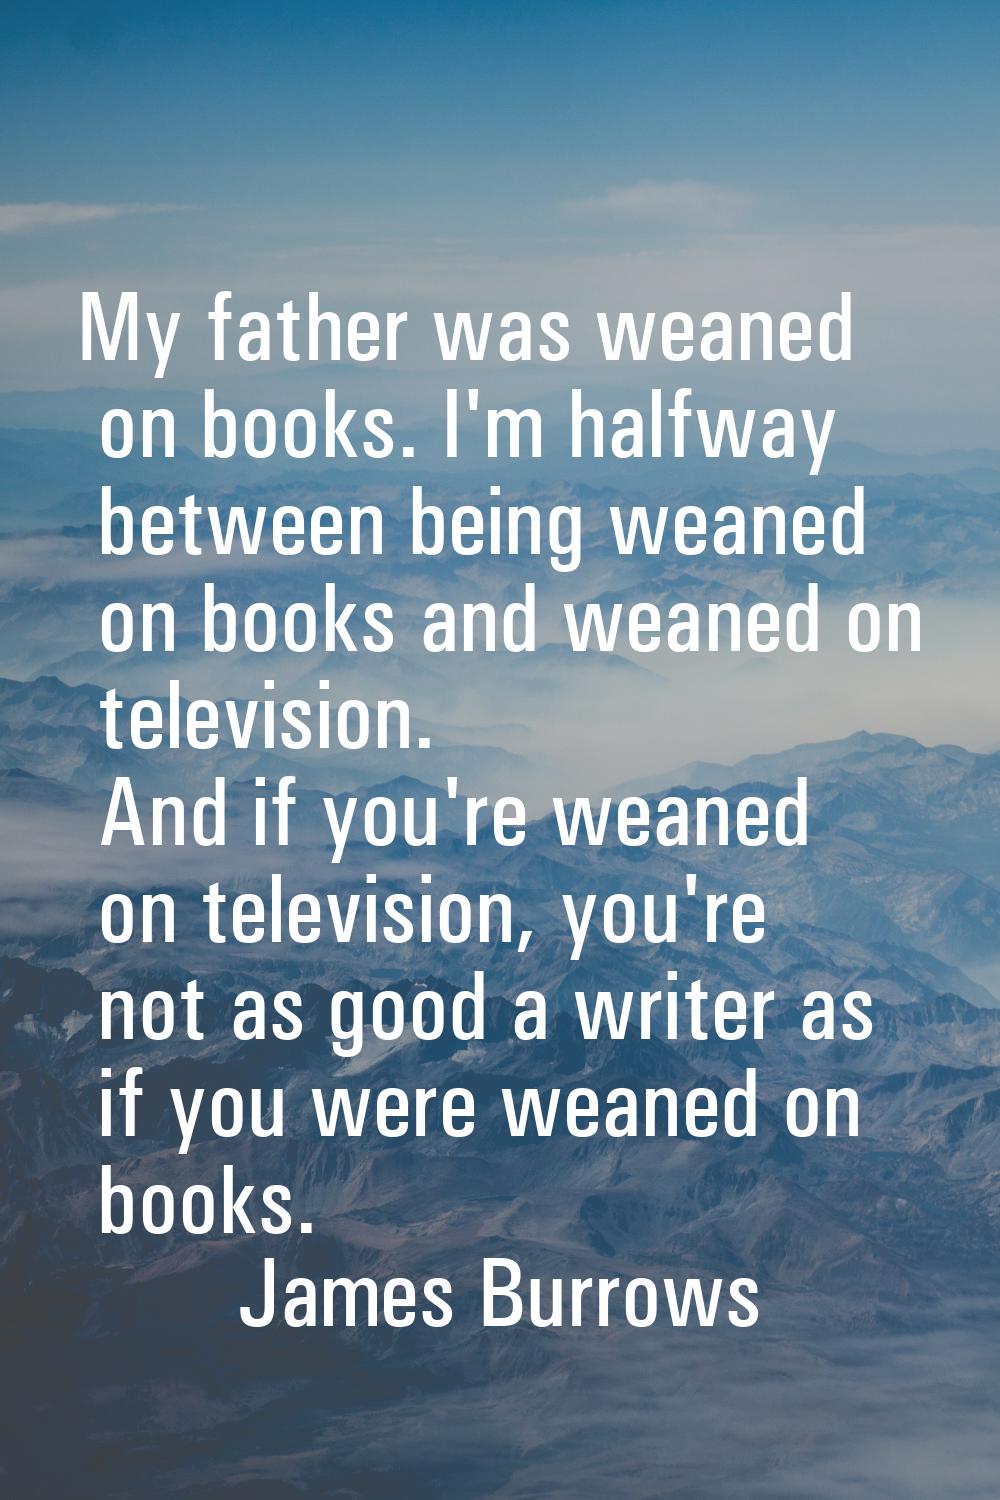 My father was weaned on books. I'm halfway between being weaned on books and weaned on television. 